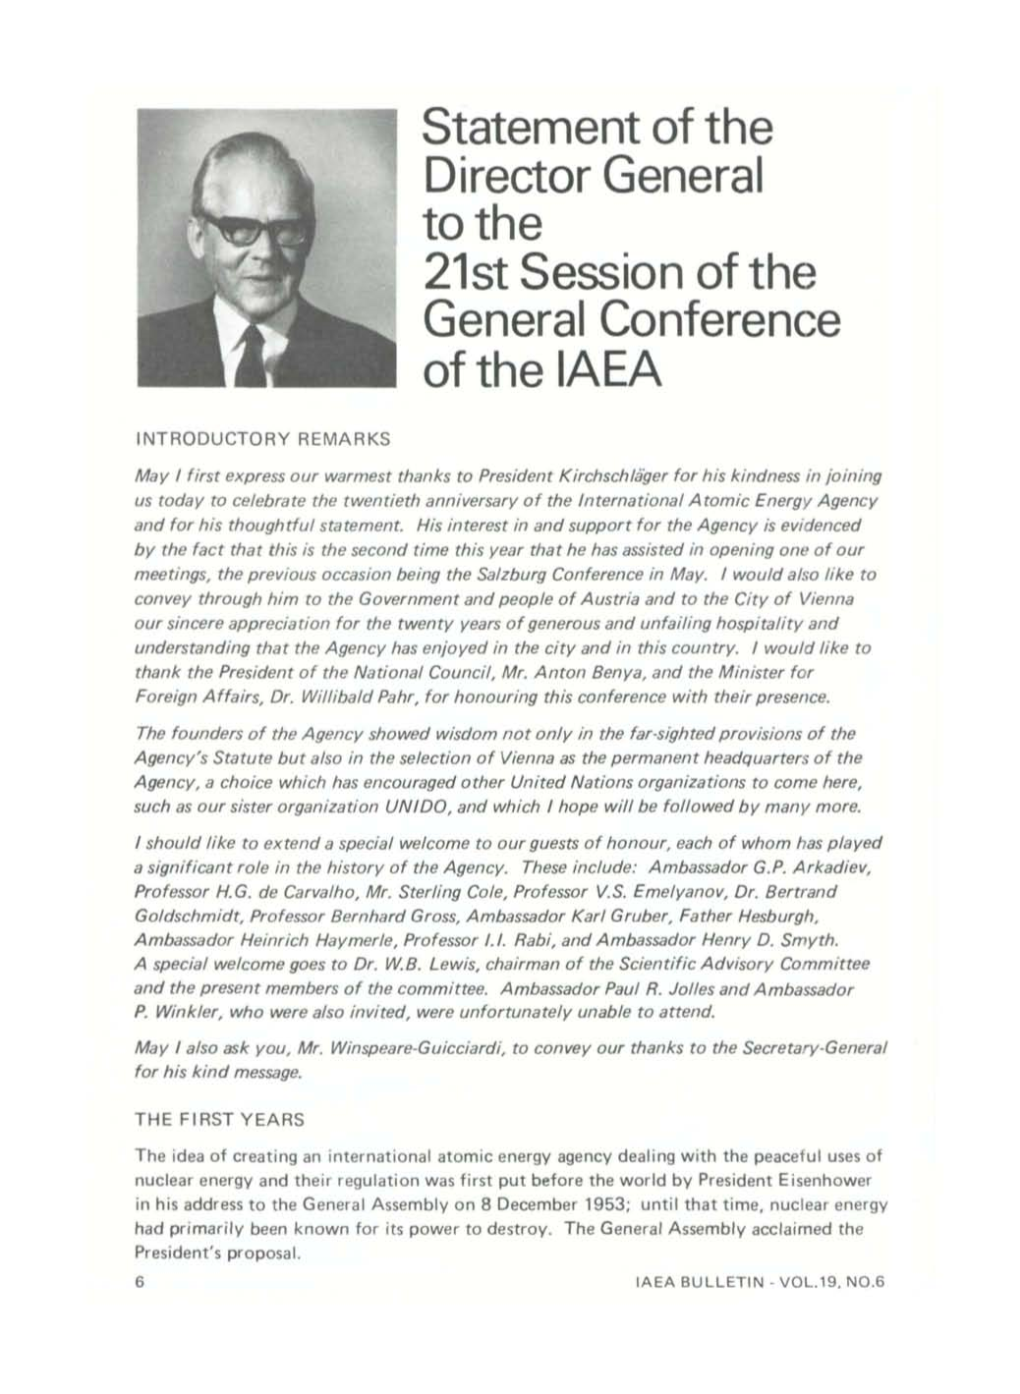 Statement of the Director General to the 21St Session of the General Conference of the IAEA